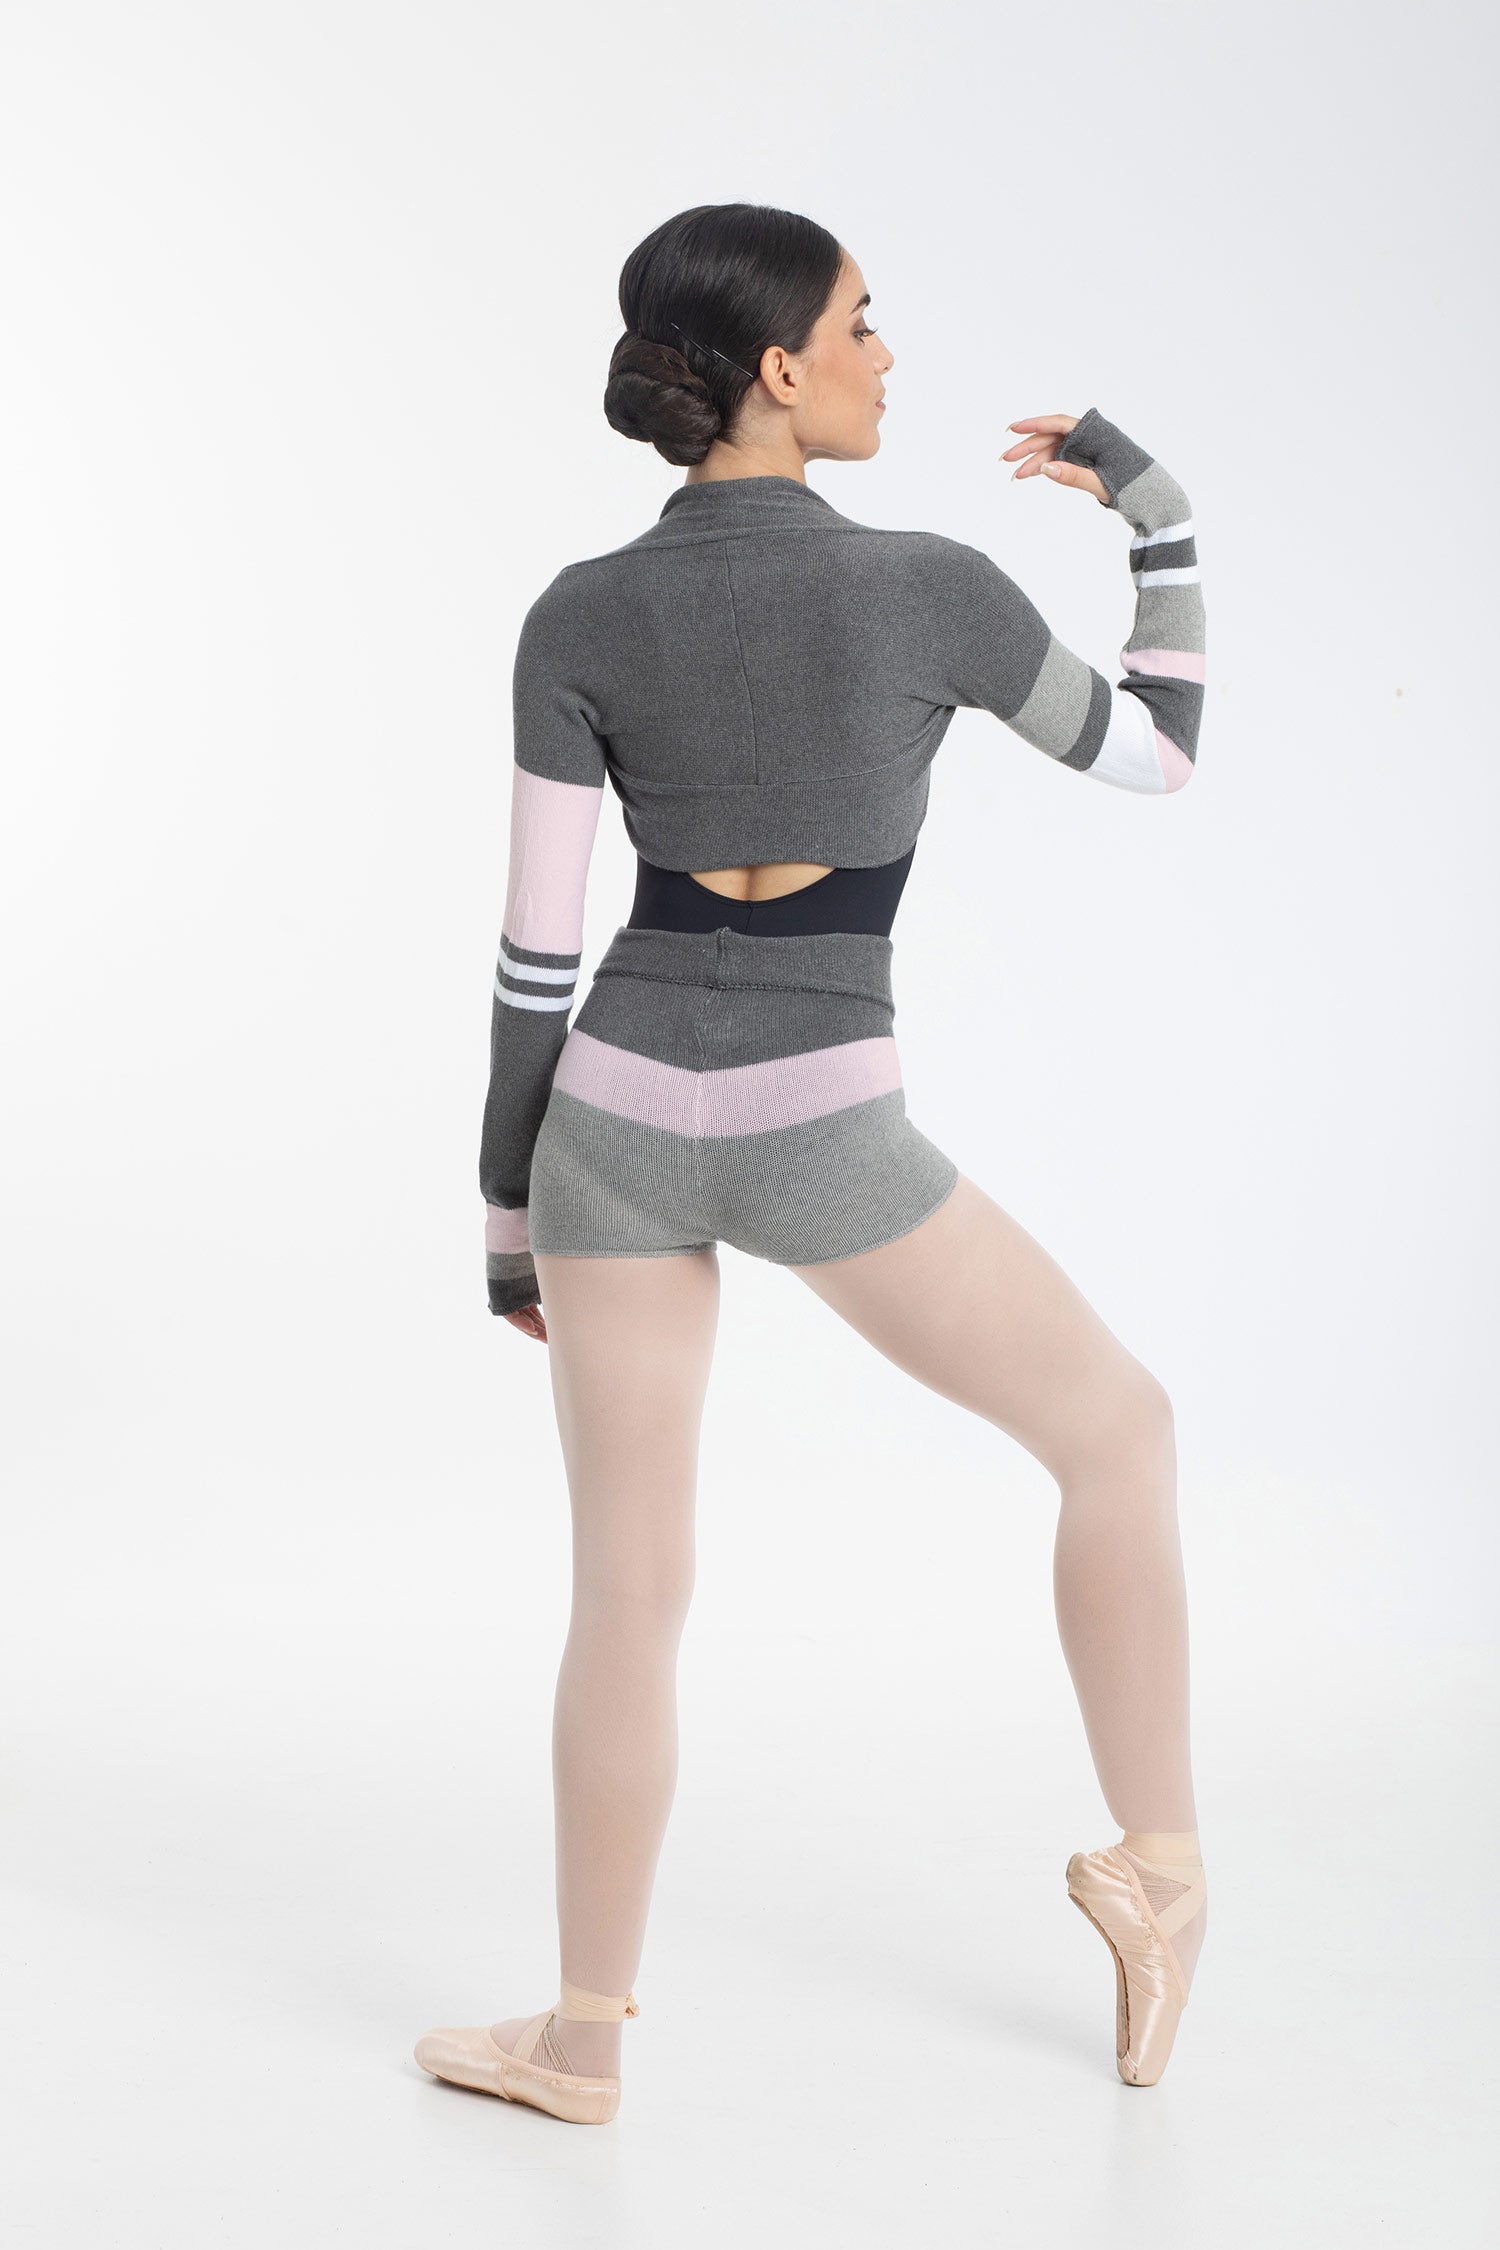 Intermezzo Mansurbi Knitted Warmup Shrug - Grey, Pink & White from The Collective Dancewear